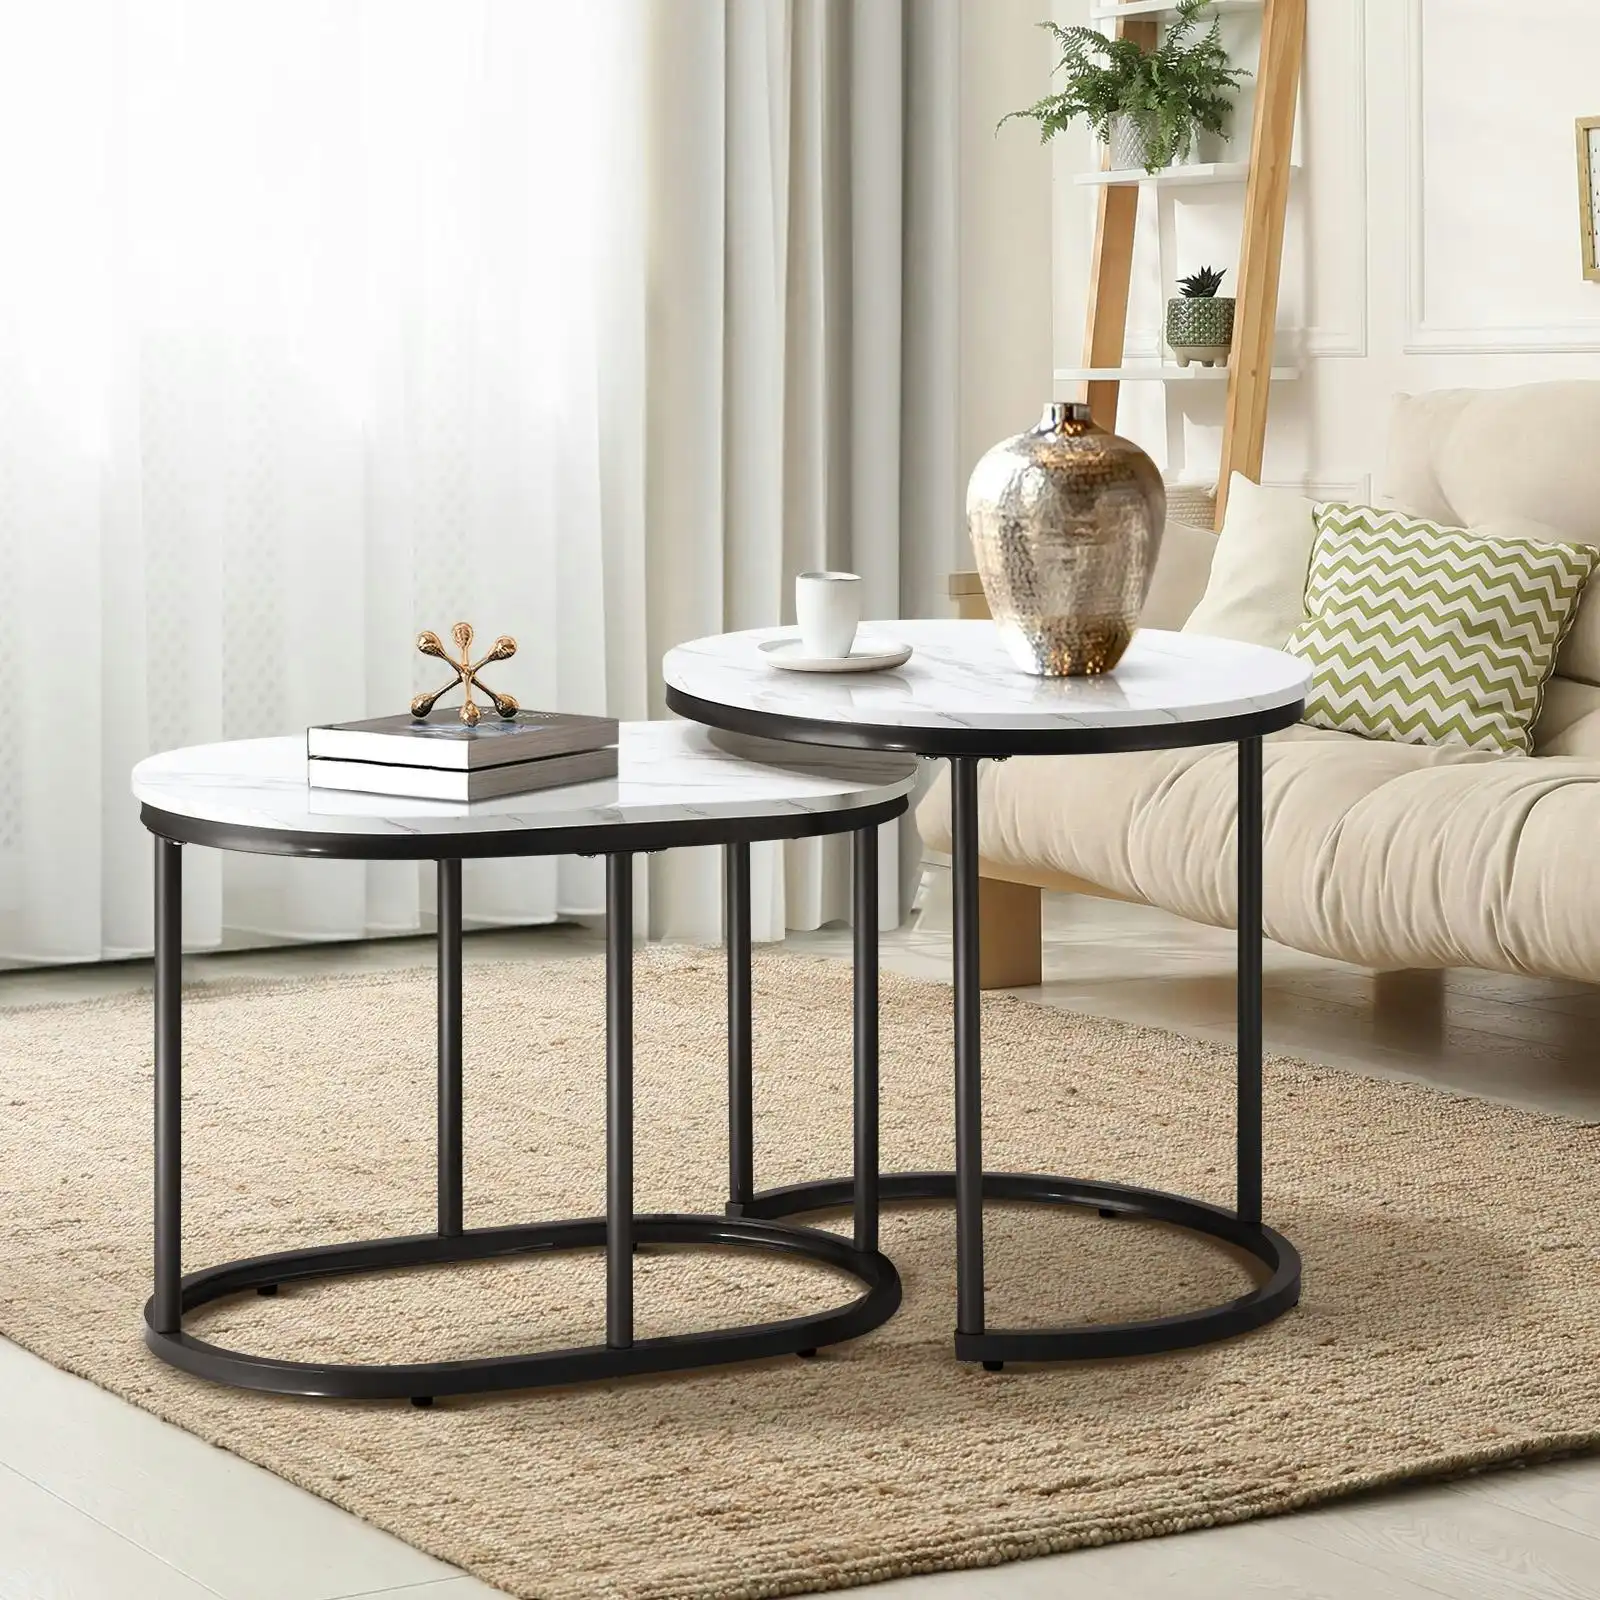 Oikiture Set of 2 Coffee Table Round Oval Marble Nesting Side End Table Black